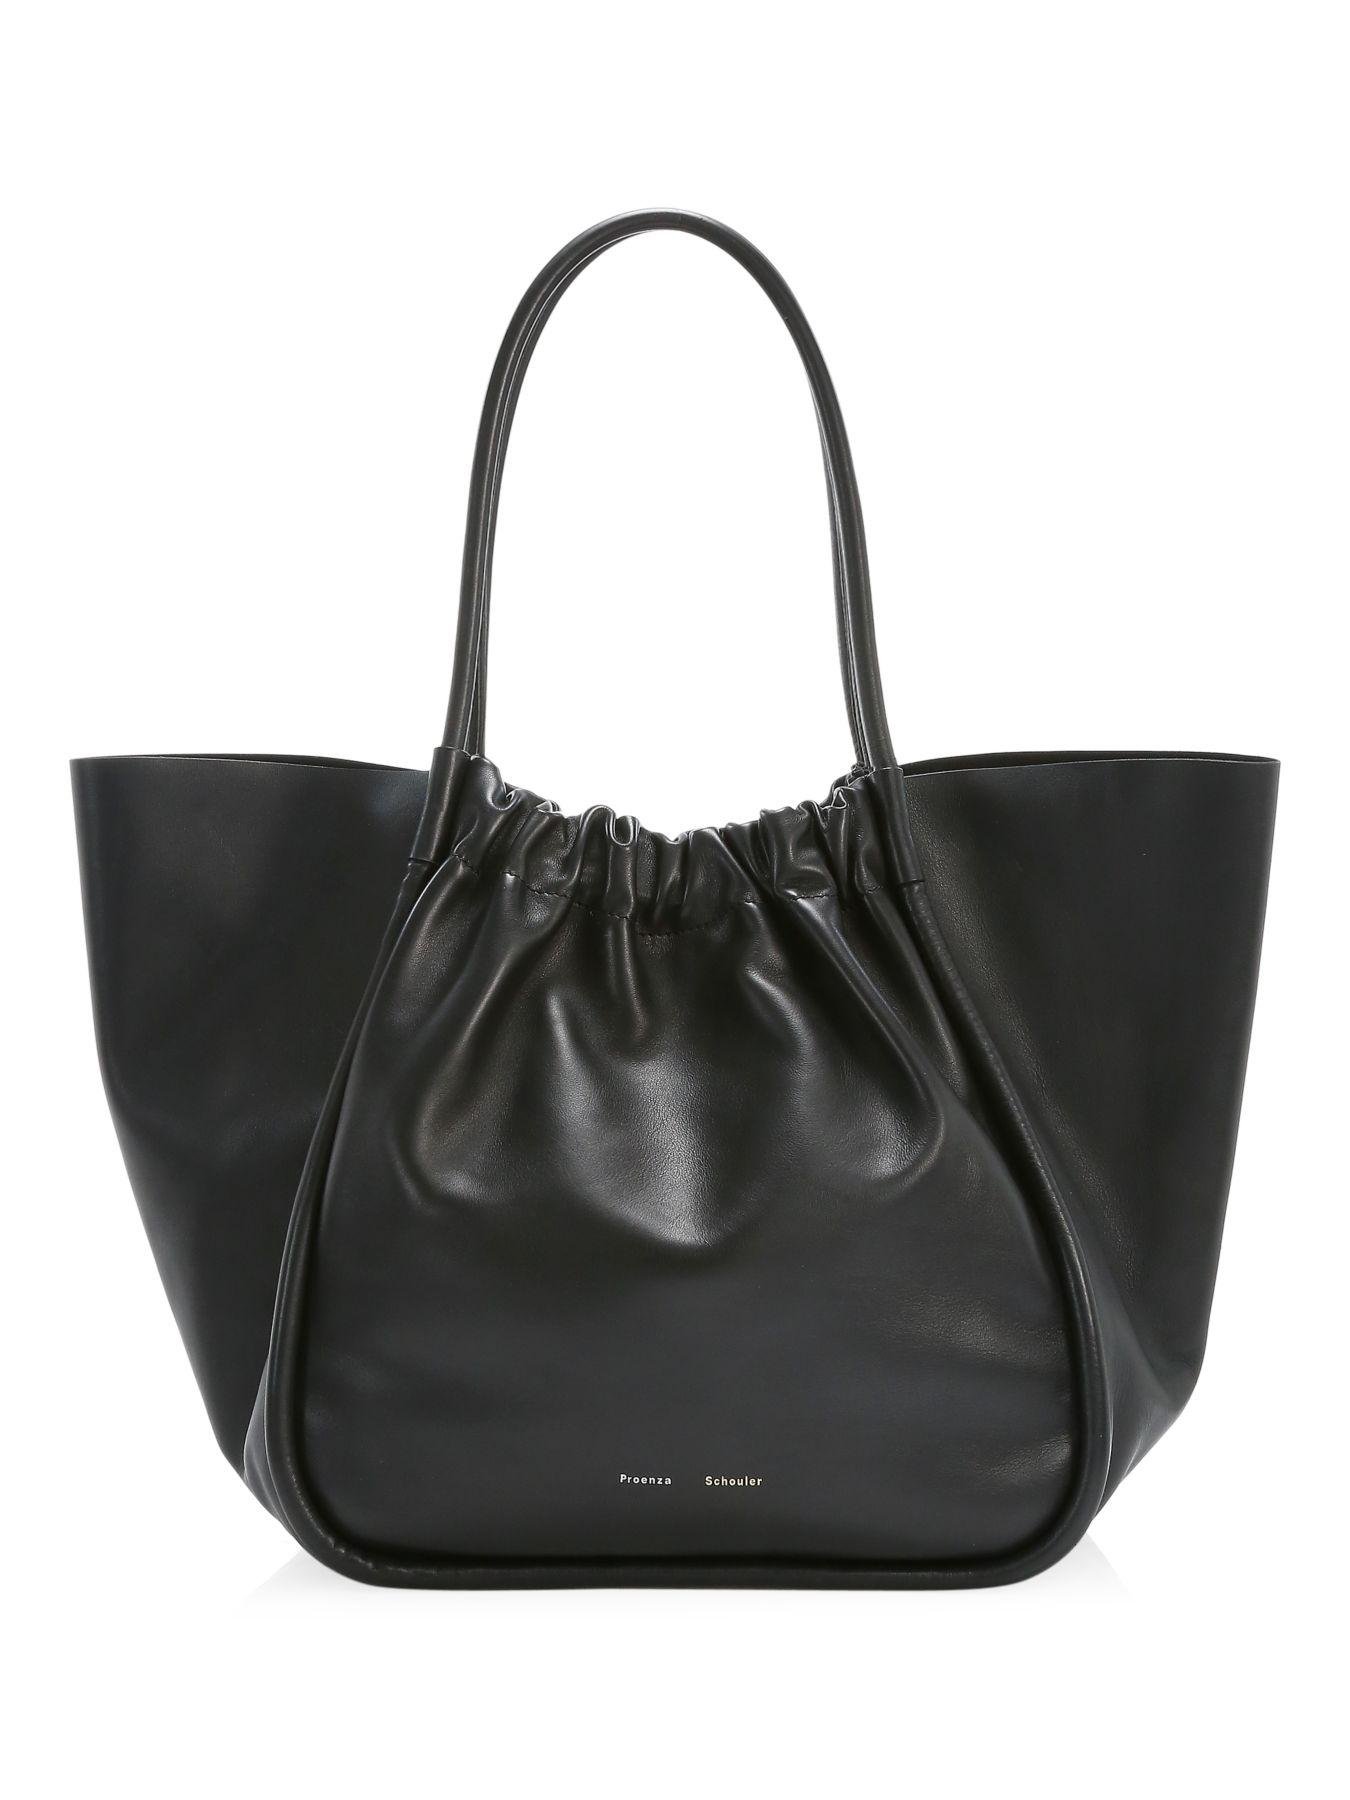 Proenza Schouler Extra-large Ruched Leather Tote in Black - Lyst